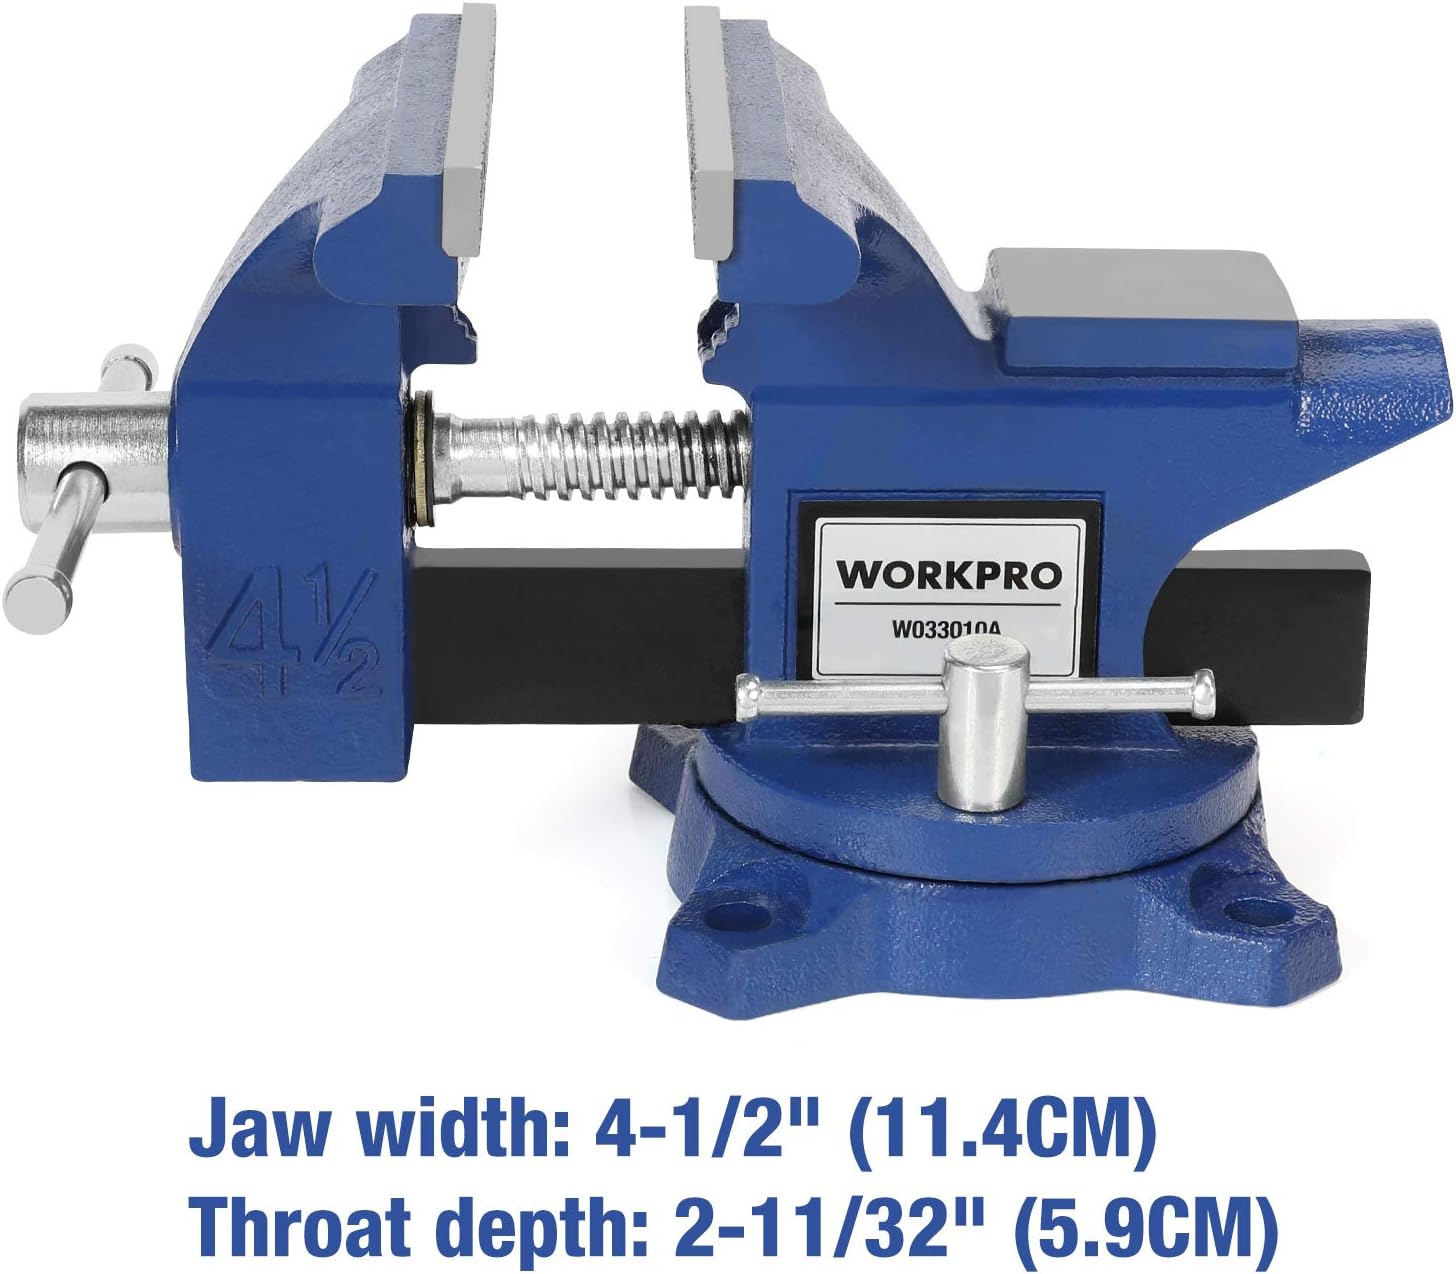 HANZGHOU GREATSTAR INDUSTRIAL  WORKPRO Bench Vise, 4.5" Heavy-Duty Utility Combination Pipe Home Vise, Swivel Base Bench for Woodworking